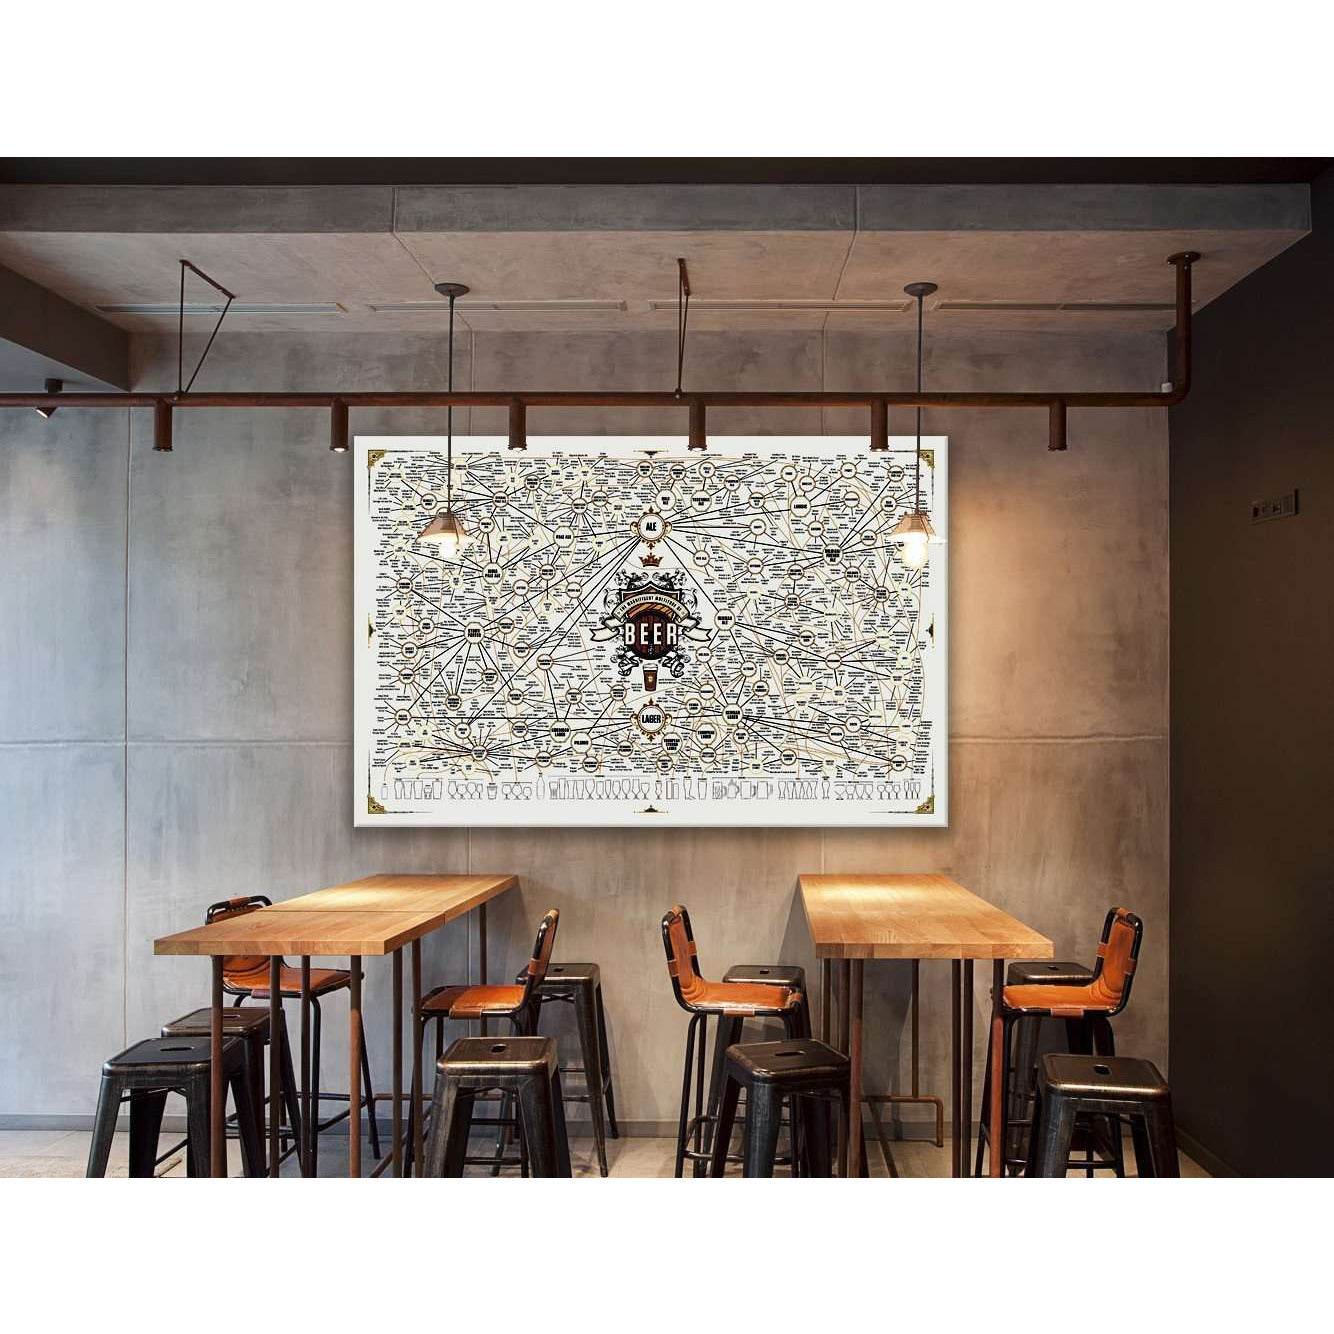 Beer Wall Art for Bar DecorationDecorate your walls with a stunning Beer Canvas Art Print from the world's largest art gallery. Choose from thousands of Beer Print artworks with various sizing options. Choose your perfect art print to complete your bar de